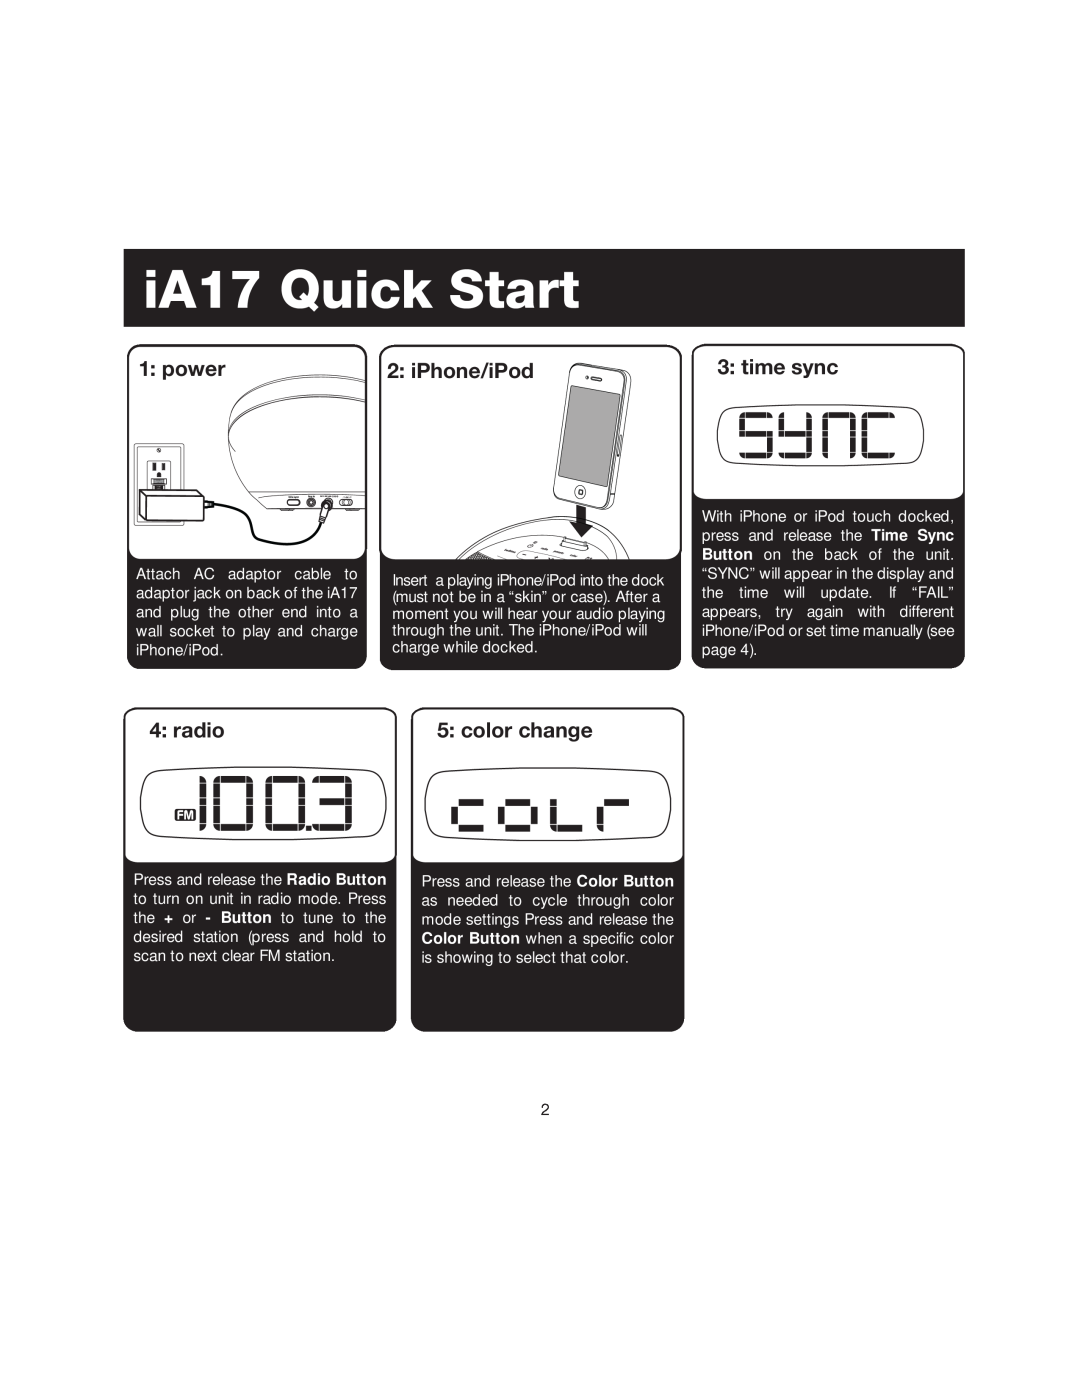 iHome instruction manual power, iPhone/iPod, time sync, radio, color change, iA17 Quick Start 